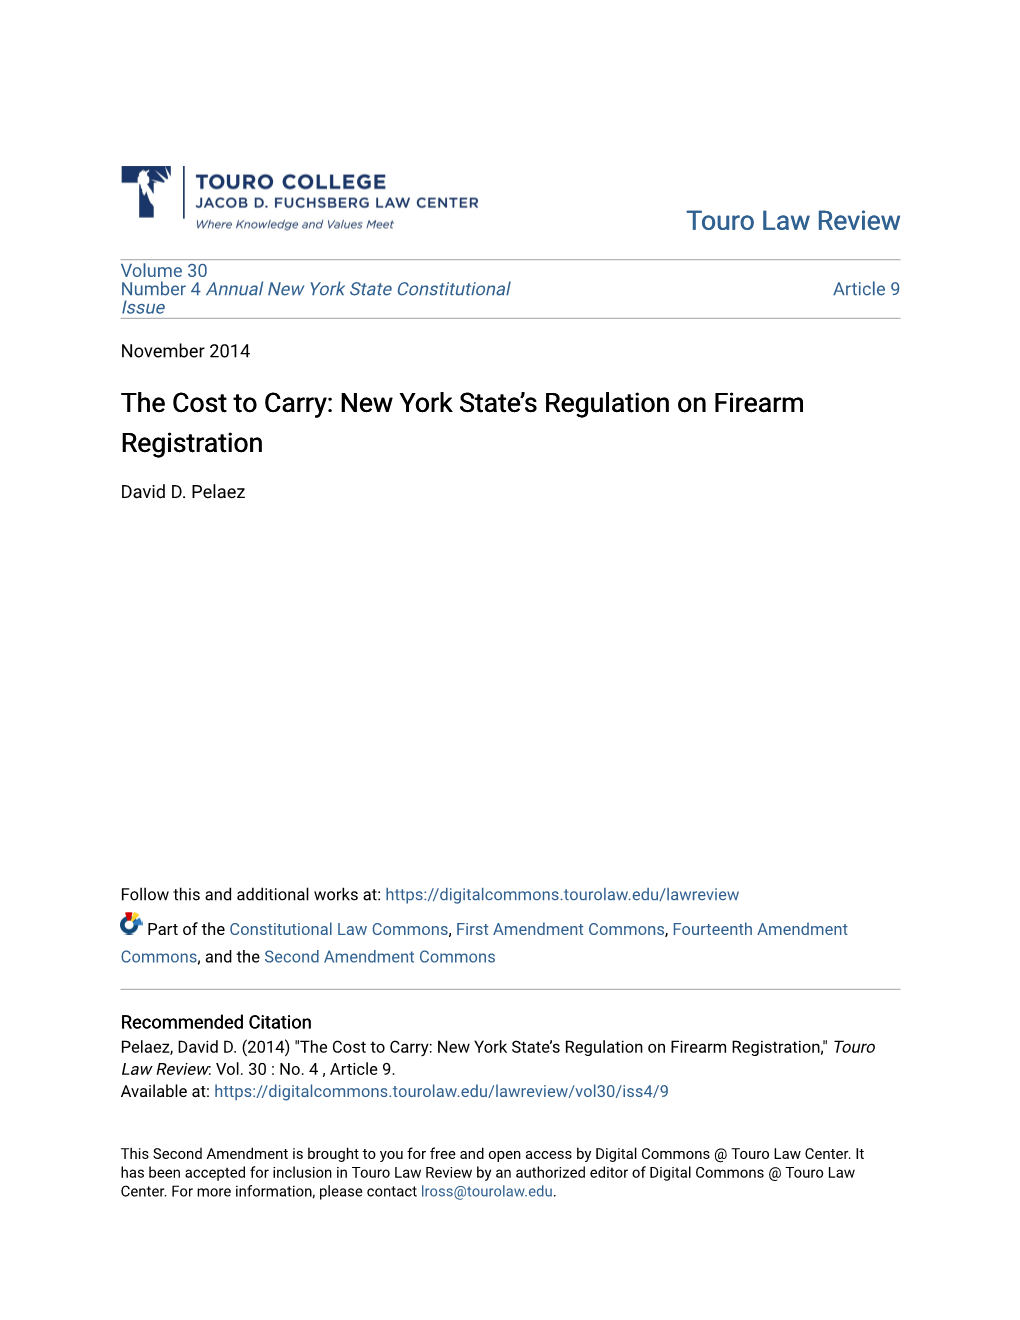 The Cost to Carry: New York State's Regulation on Firearm Registration